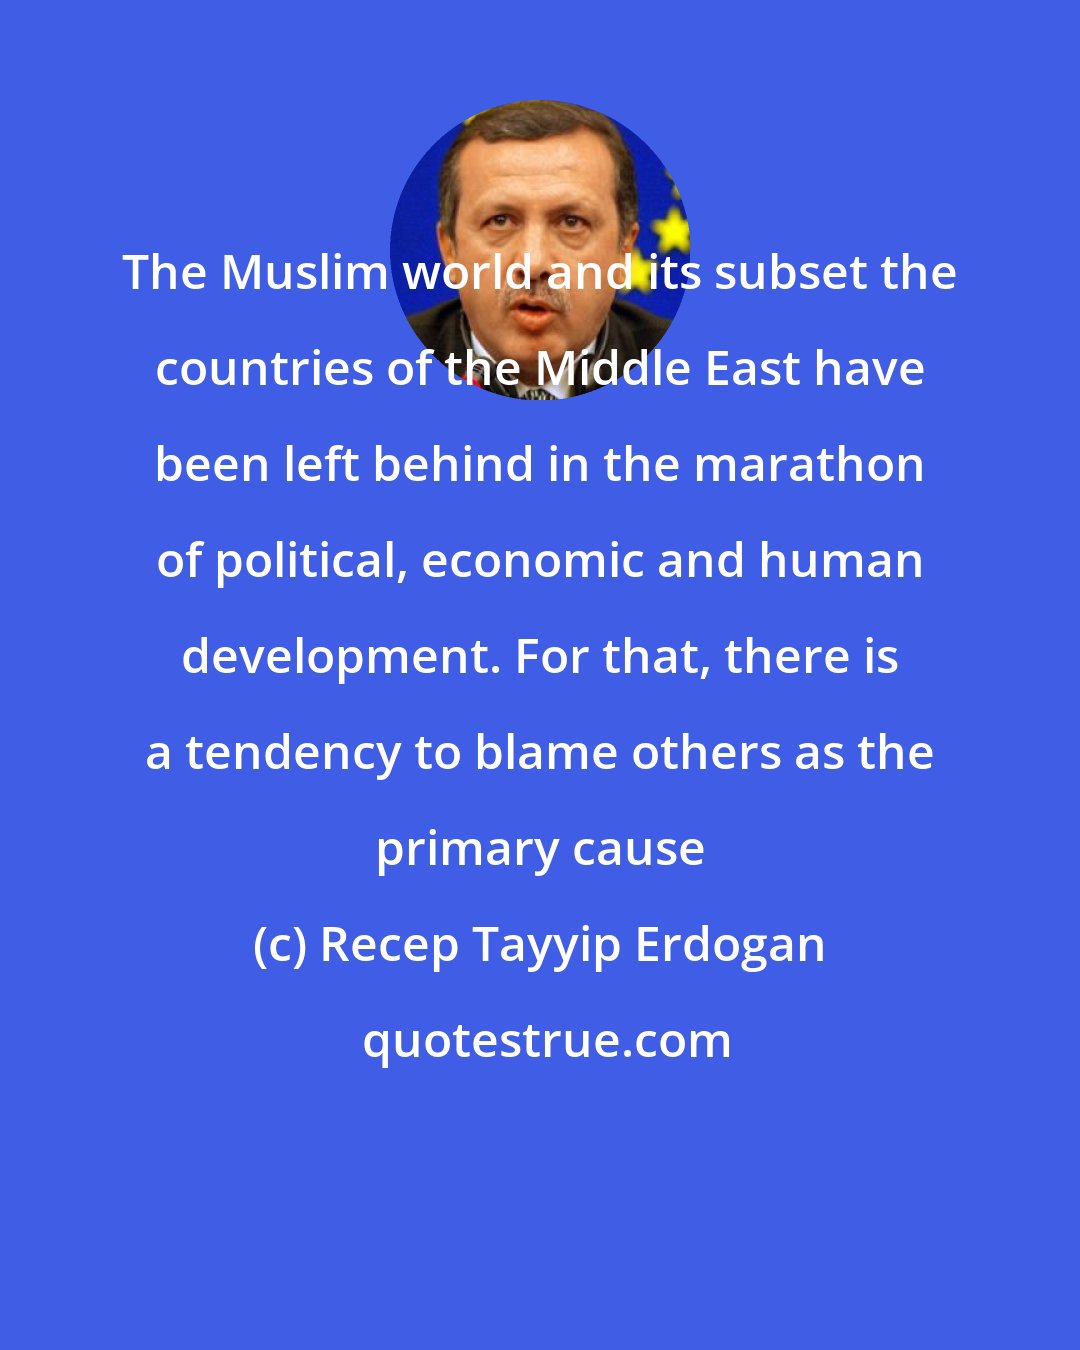 Recep Tayyip Erdogan: The Muslim world and its subset the countries of the Middle East have been left behind in the marathon of political, economic and human development. For that, there is a tendency to blame others as the primary cause